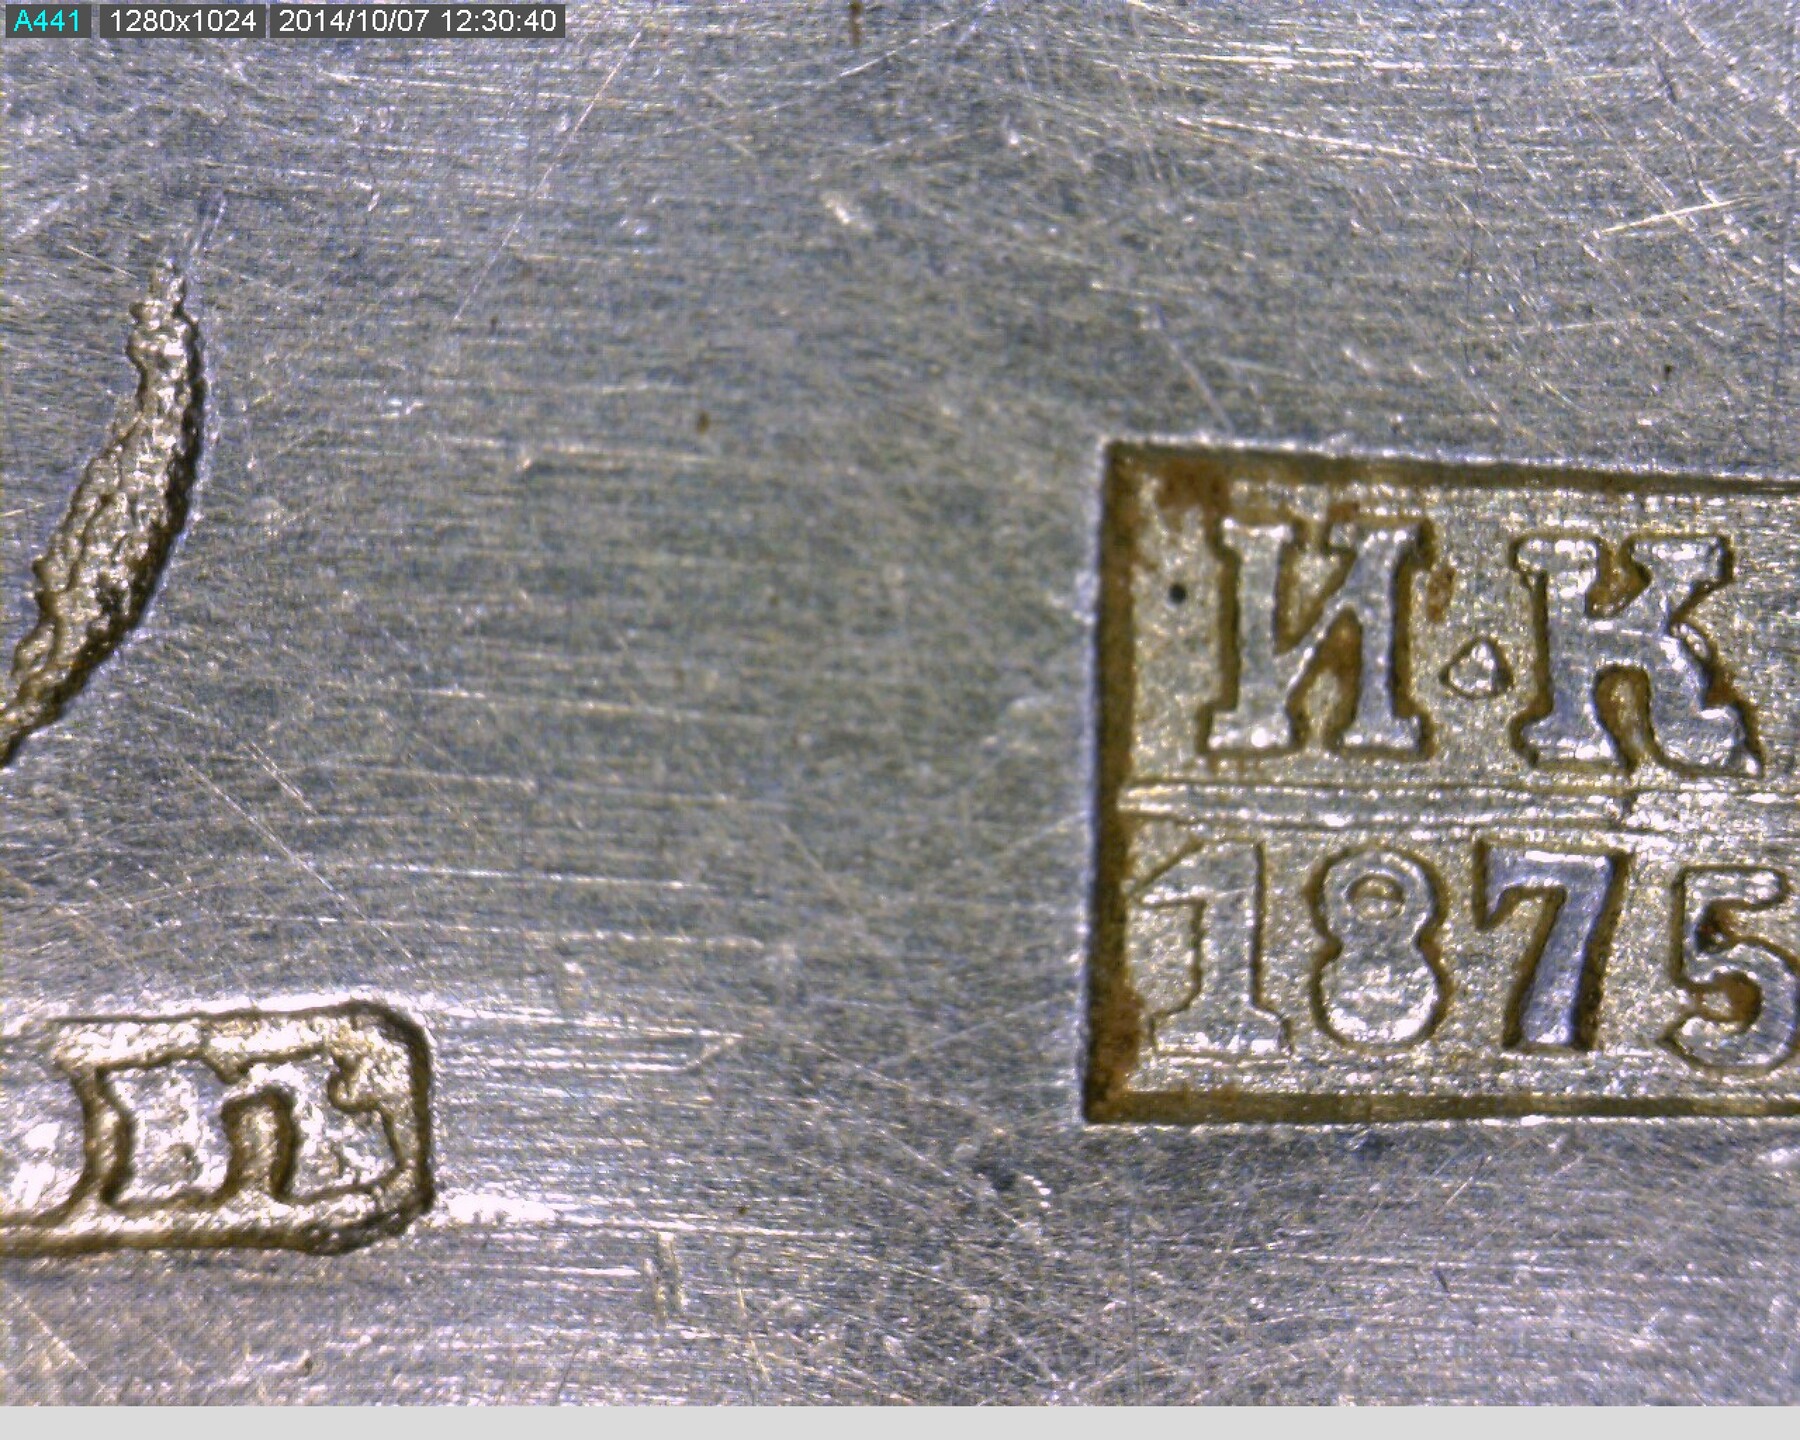 MAKER’S MARK OF PAVEL OVCHINNIKOV IN CYRILLIC, MOSCOW, 1875, 91 STANDARD